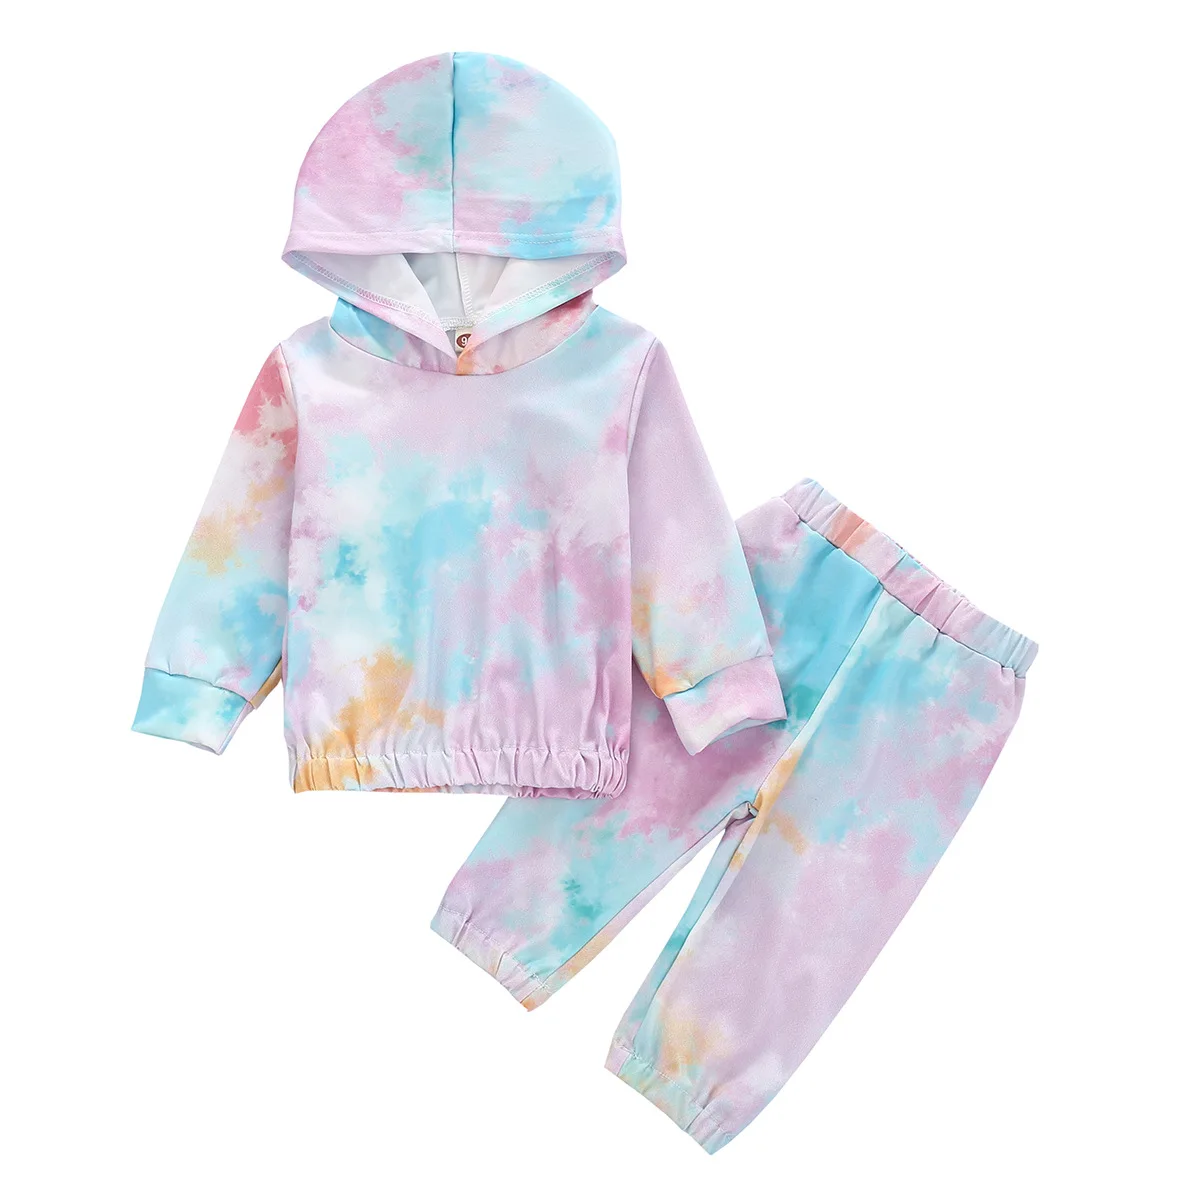 

PIZZSEOON Baby Girl Clothes 2pcs Girl's Tie Dye Hooded Sweater Tops+Pants Sports Clothes for 0-3-4 Ages Children's Clothing Sets